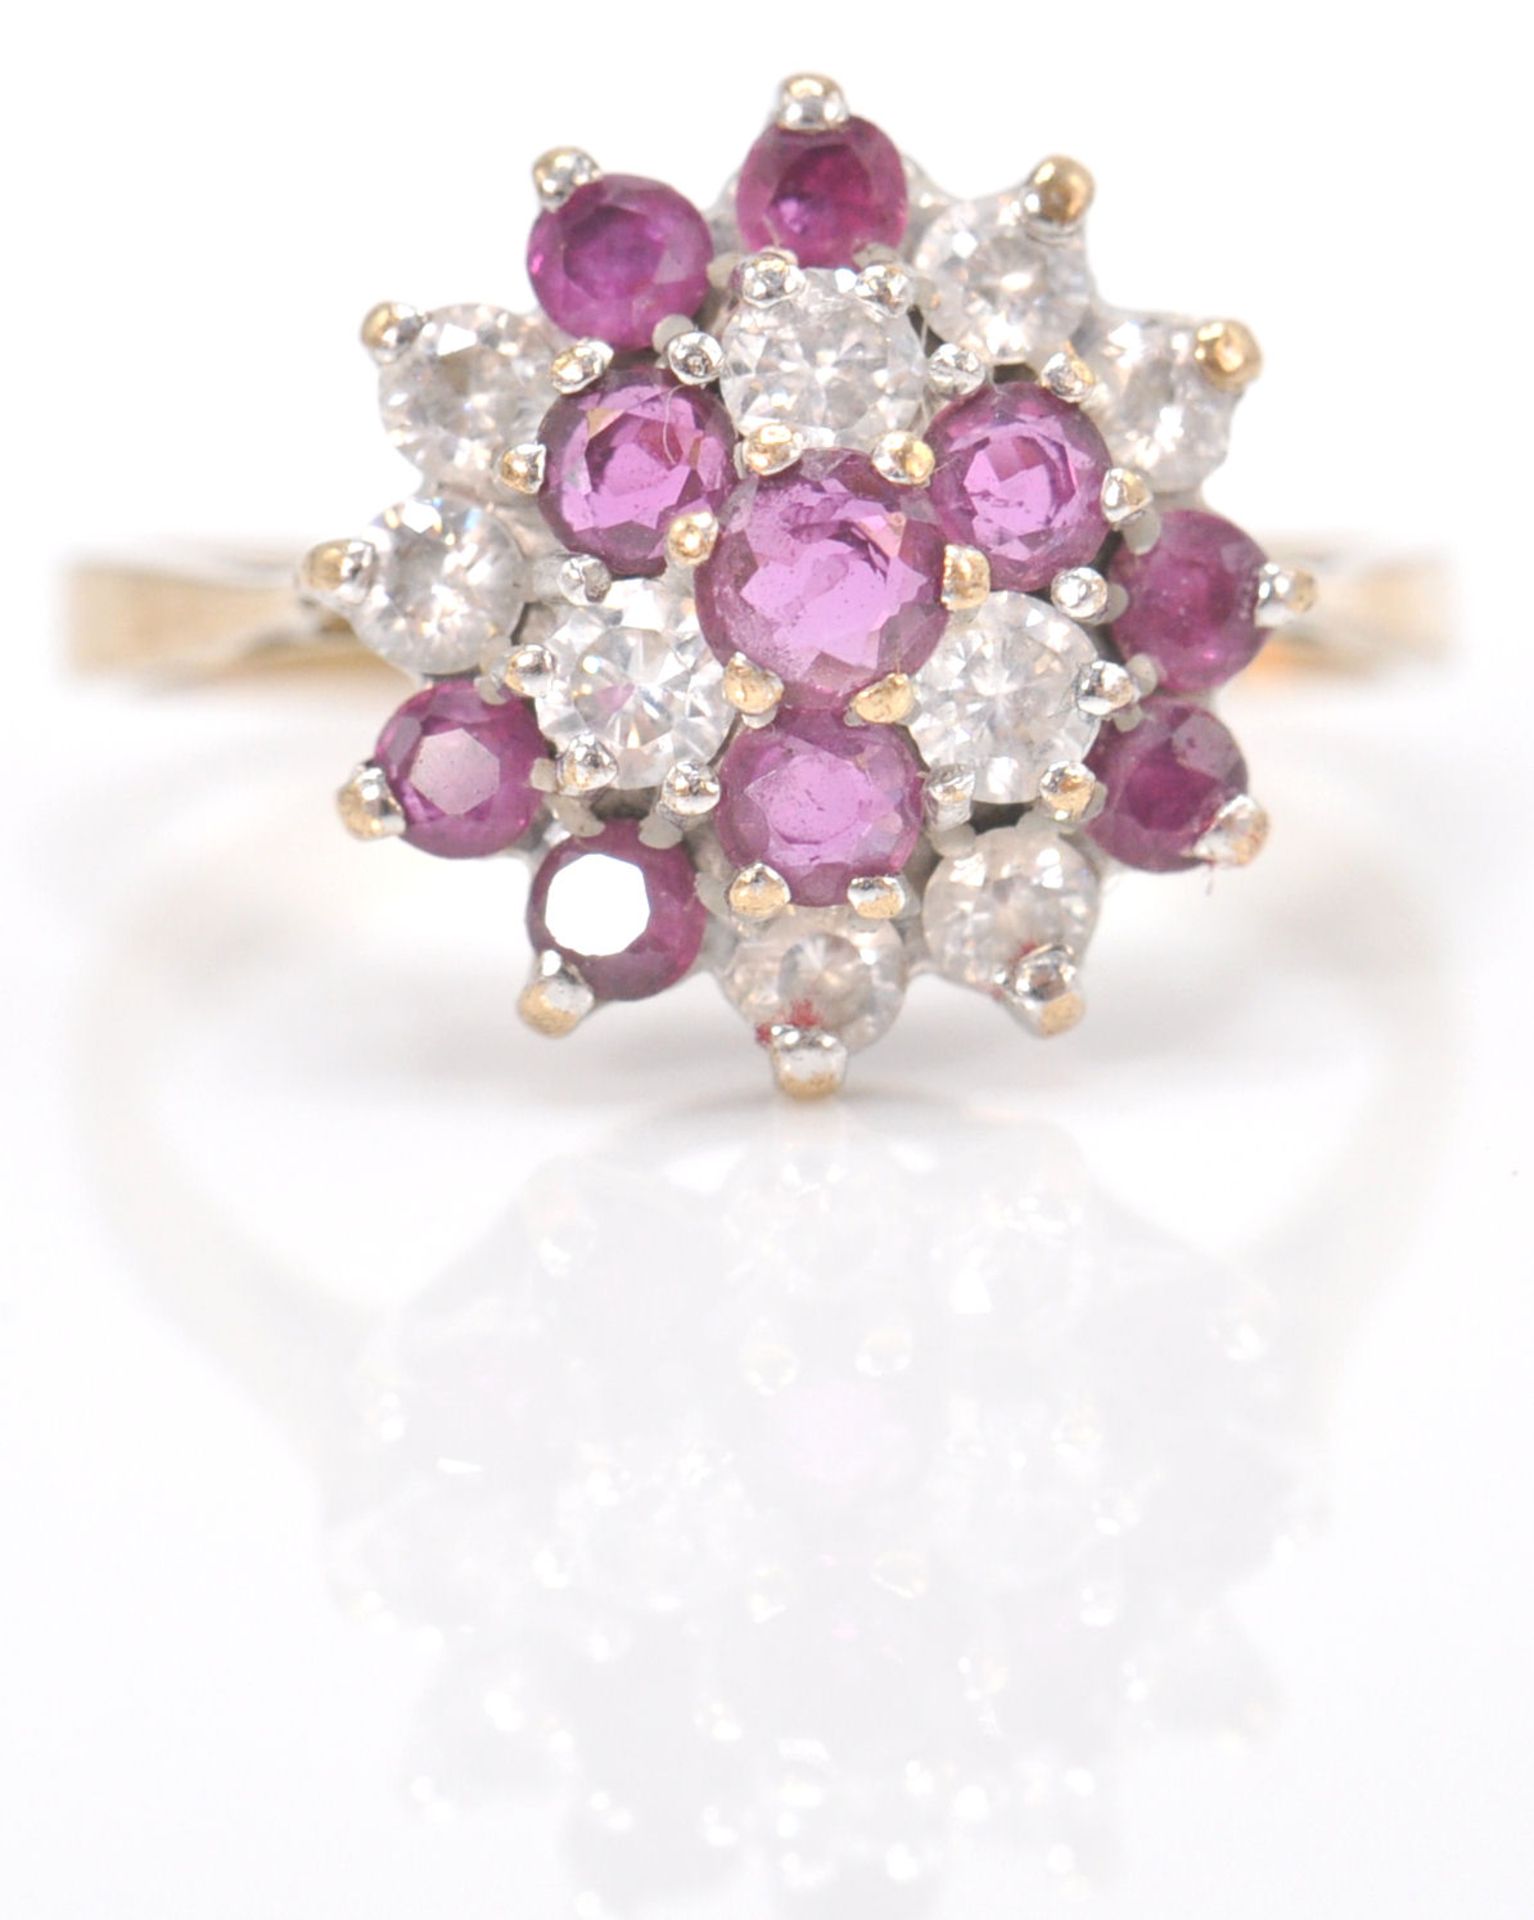 A 9ct gold hallmarked cluster ring. The ring set with amethyst and white mixed cut stones  in basket